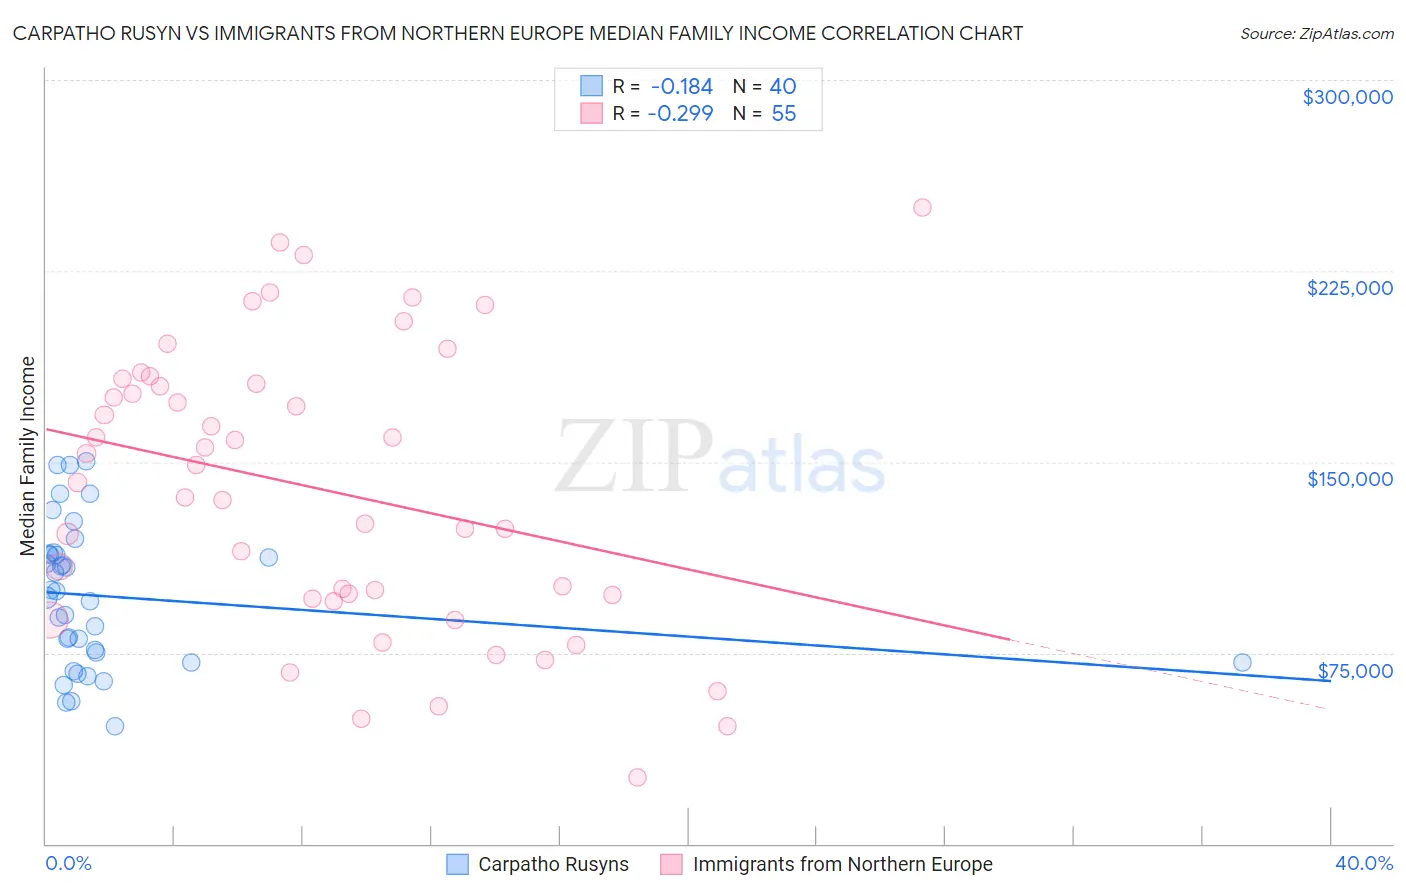 Carpatho Rusyn vs Immigrants from Northern Europe Median Family Income